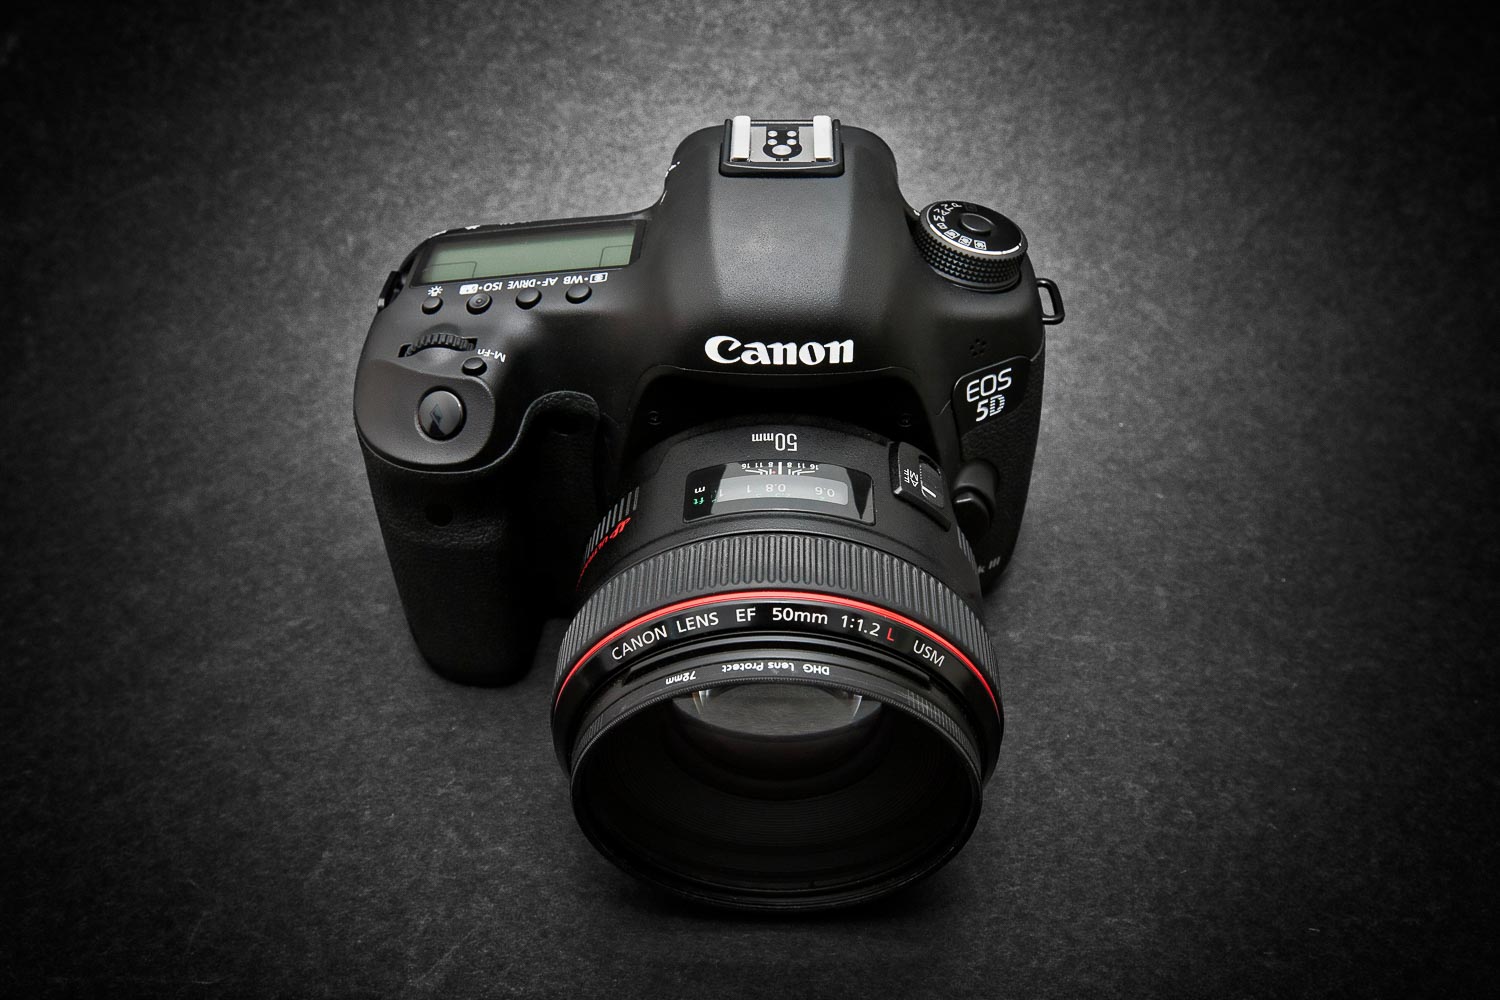 canon mark iii camera with a 50mm canon lens f 1.2